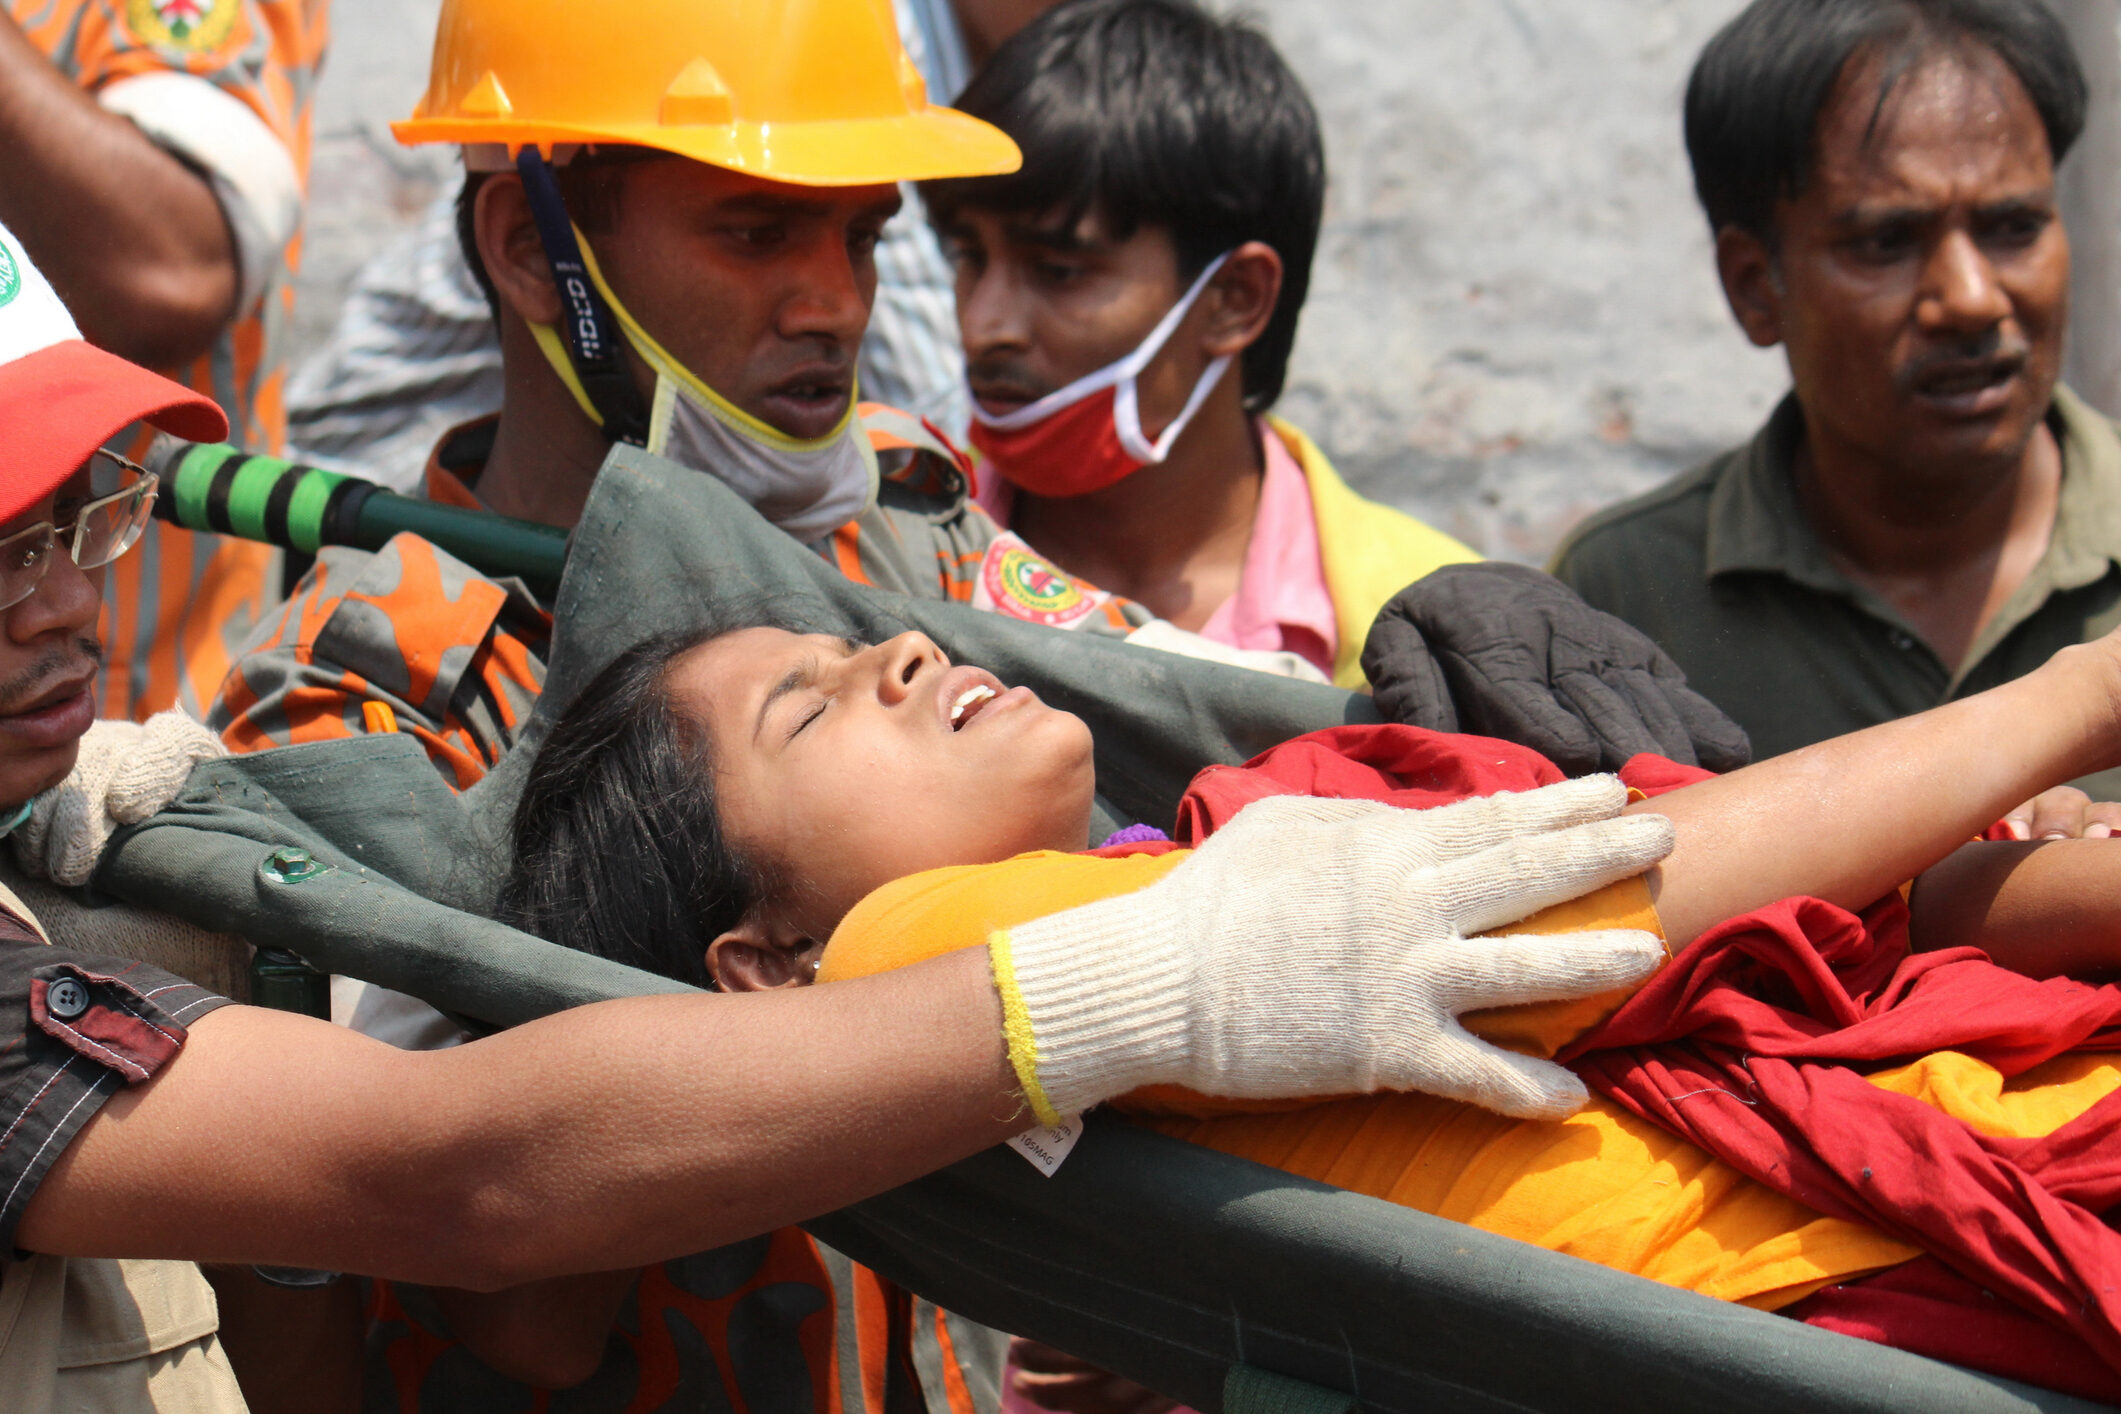 The Bangladesh Accord was set up in response to disasters in clothing factories in Bangladesh, including the collapse of the Rana Plaza factory building on 24 April 2013.